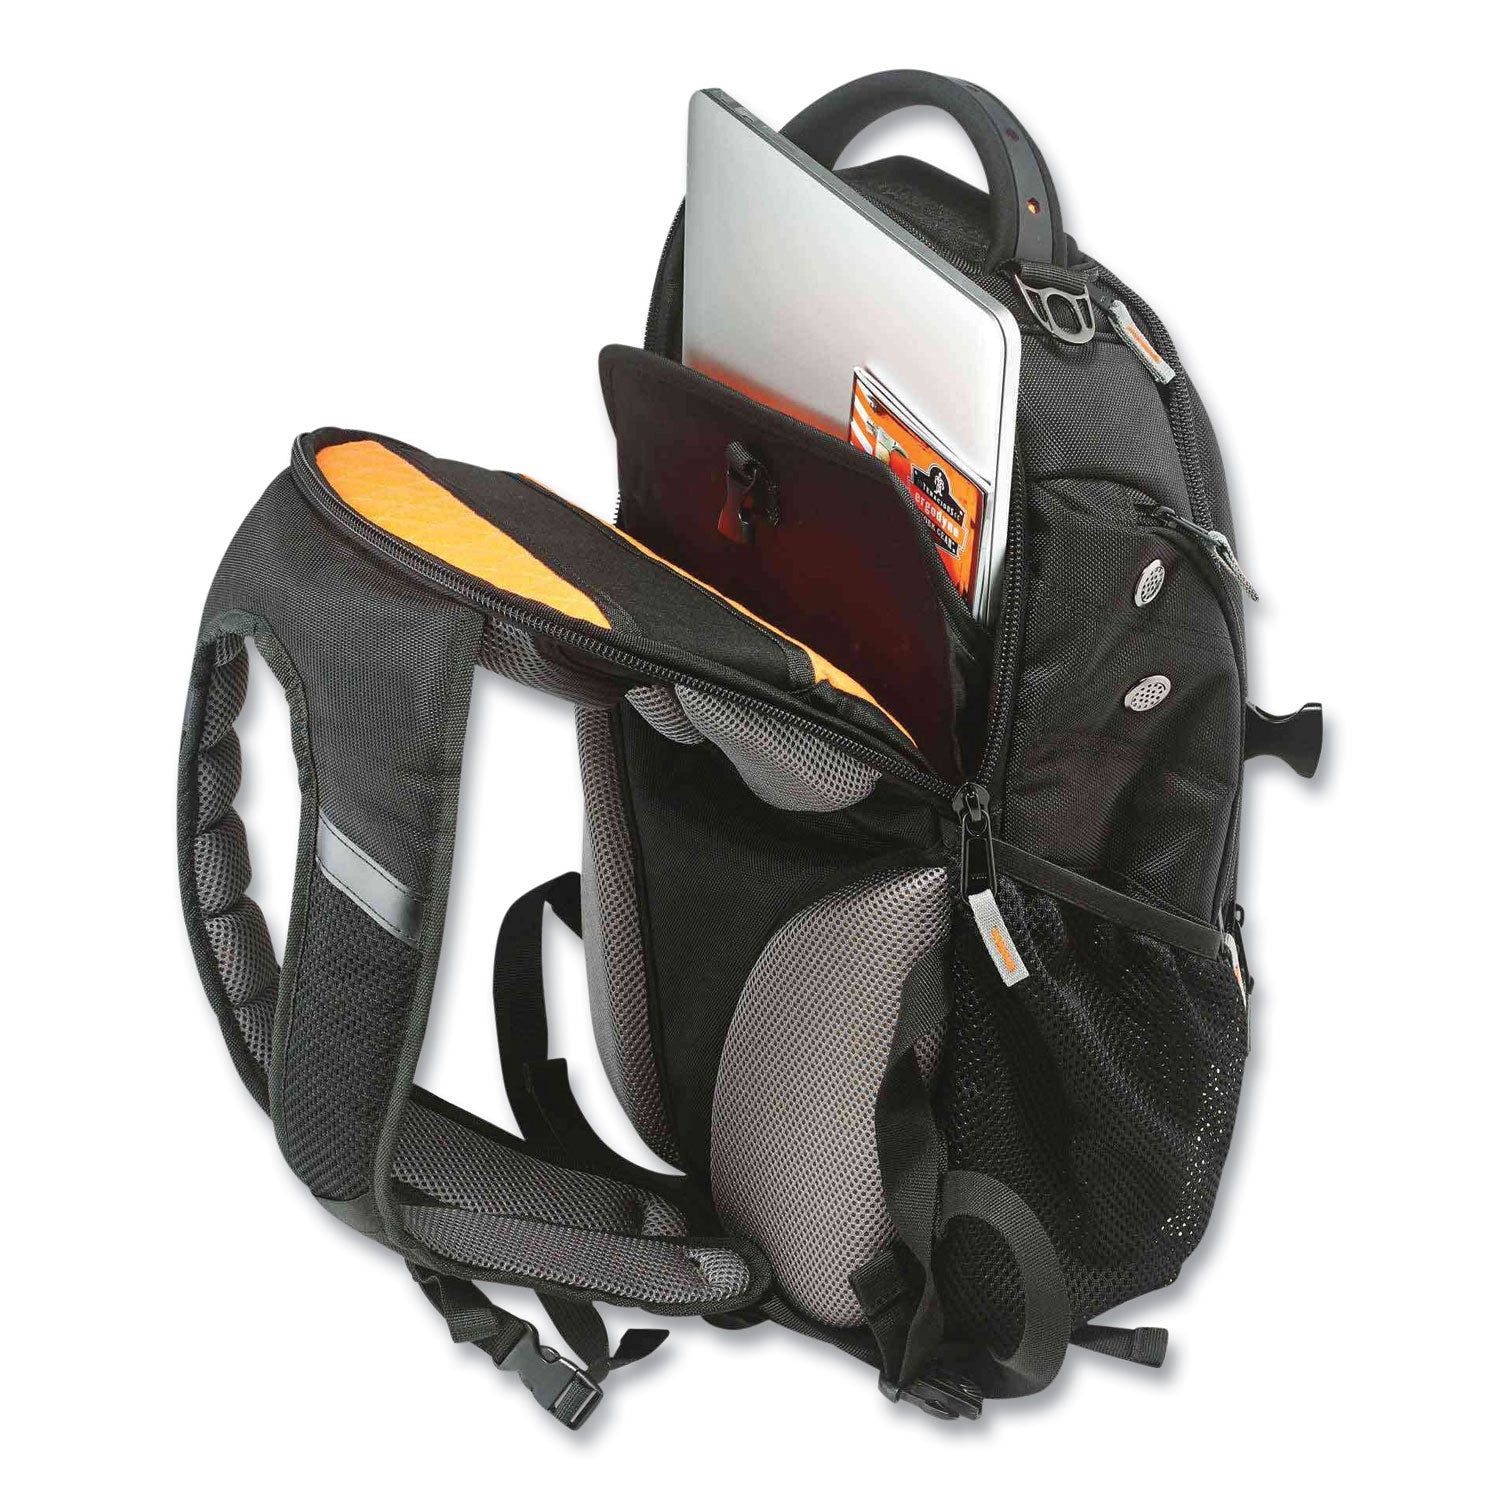 arsenal-5144-mobile-office-backpack-8-x-14-x-28-black-ships-in-1-3-business-days_ego13044 - 5